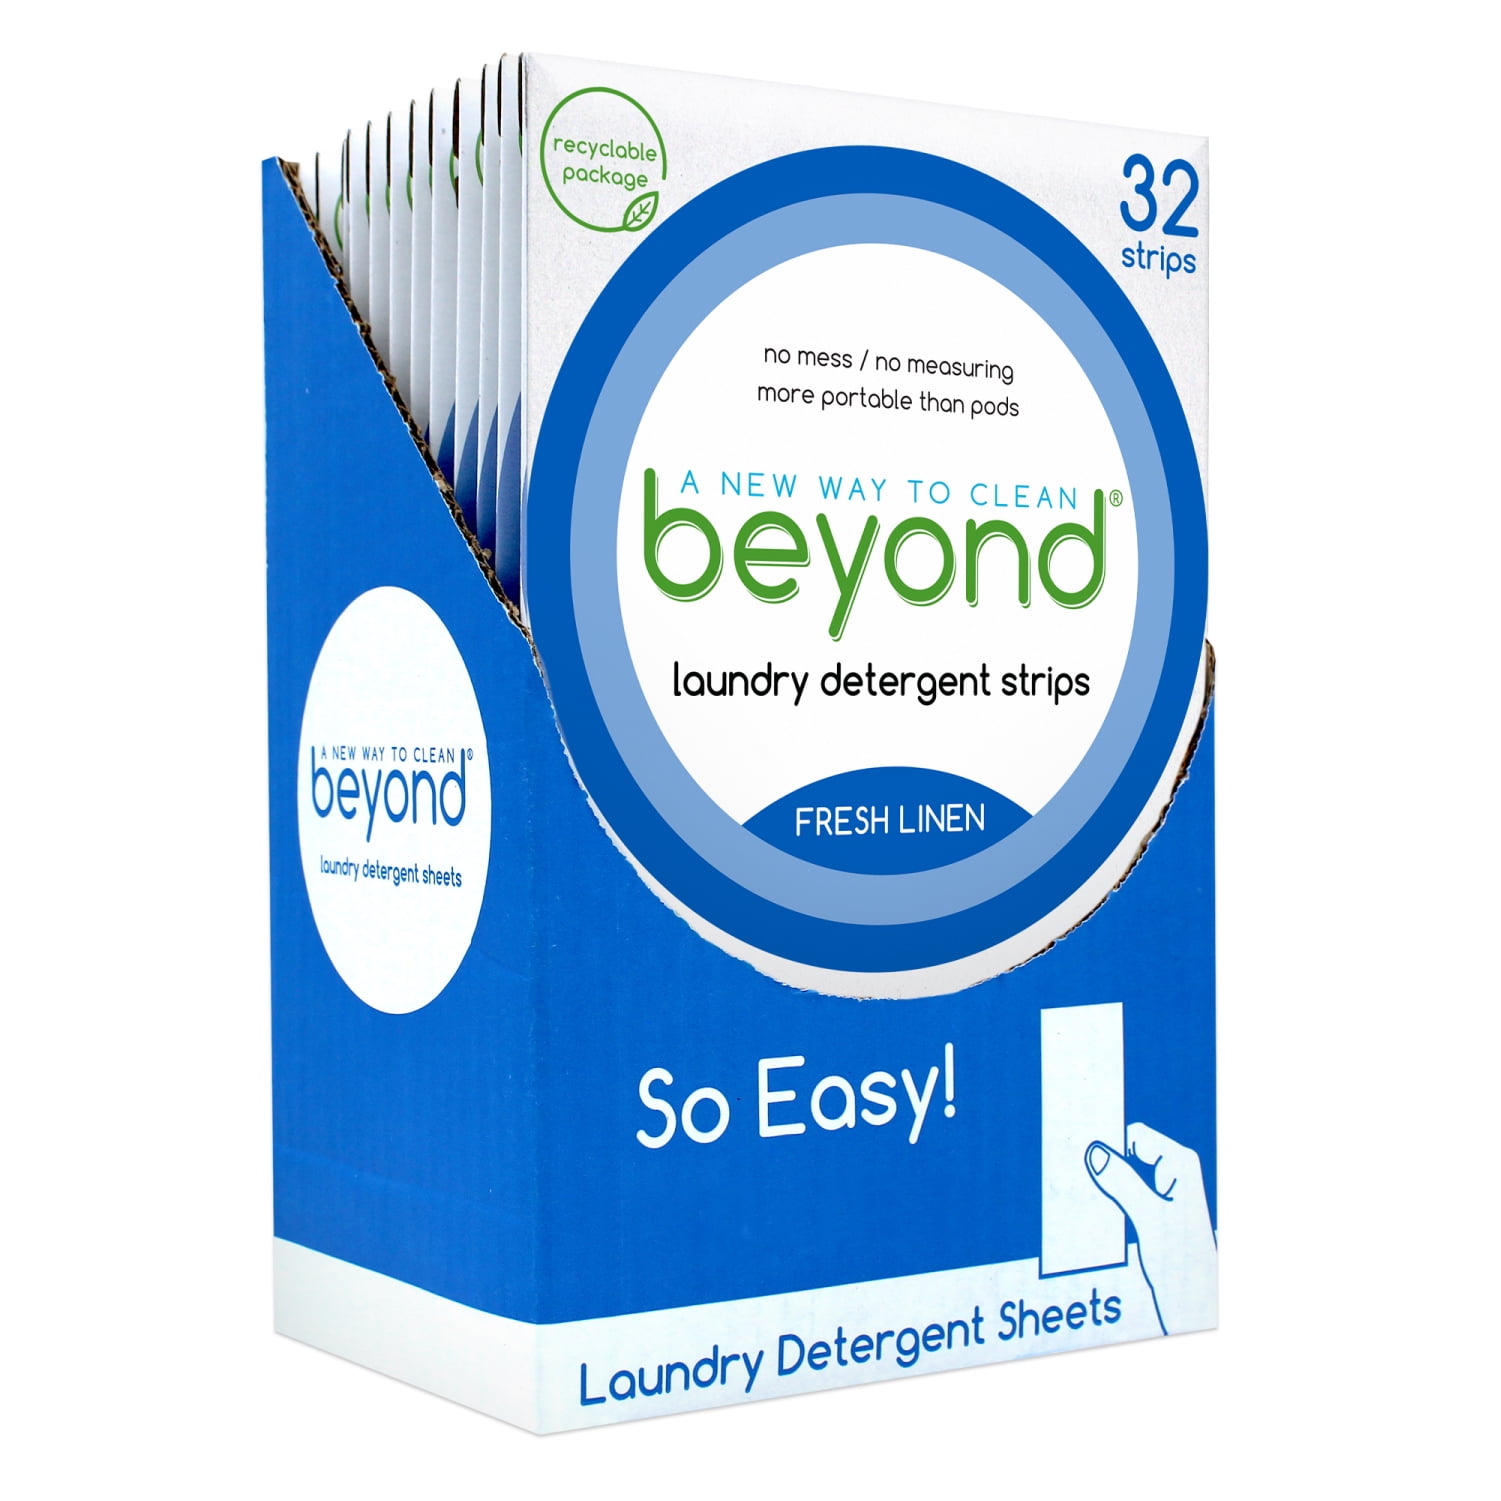 Laundry Detergent Eco Sheets - 32 Loads - Pack